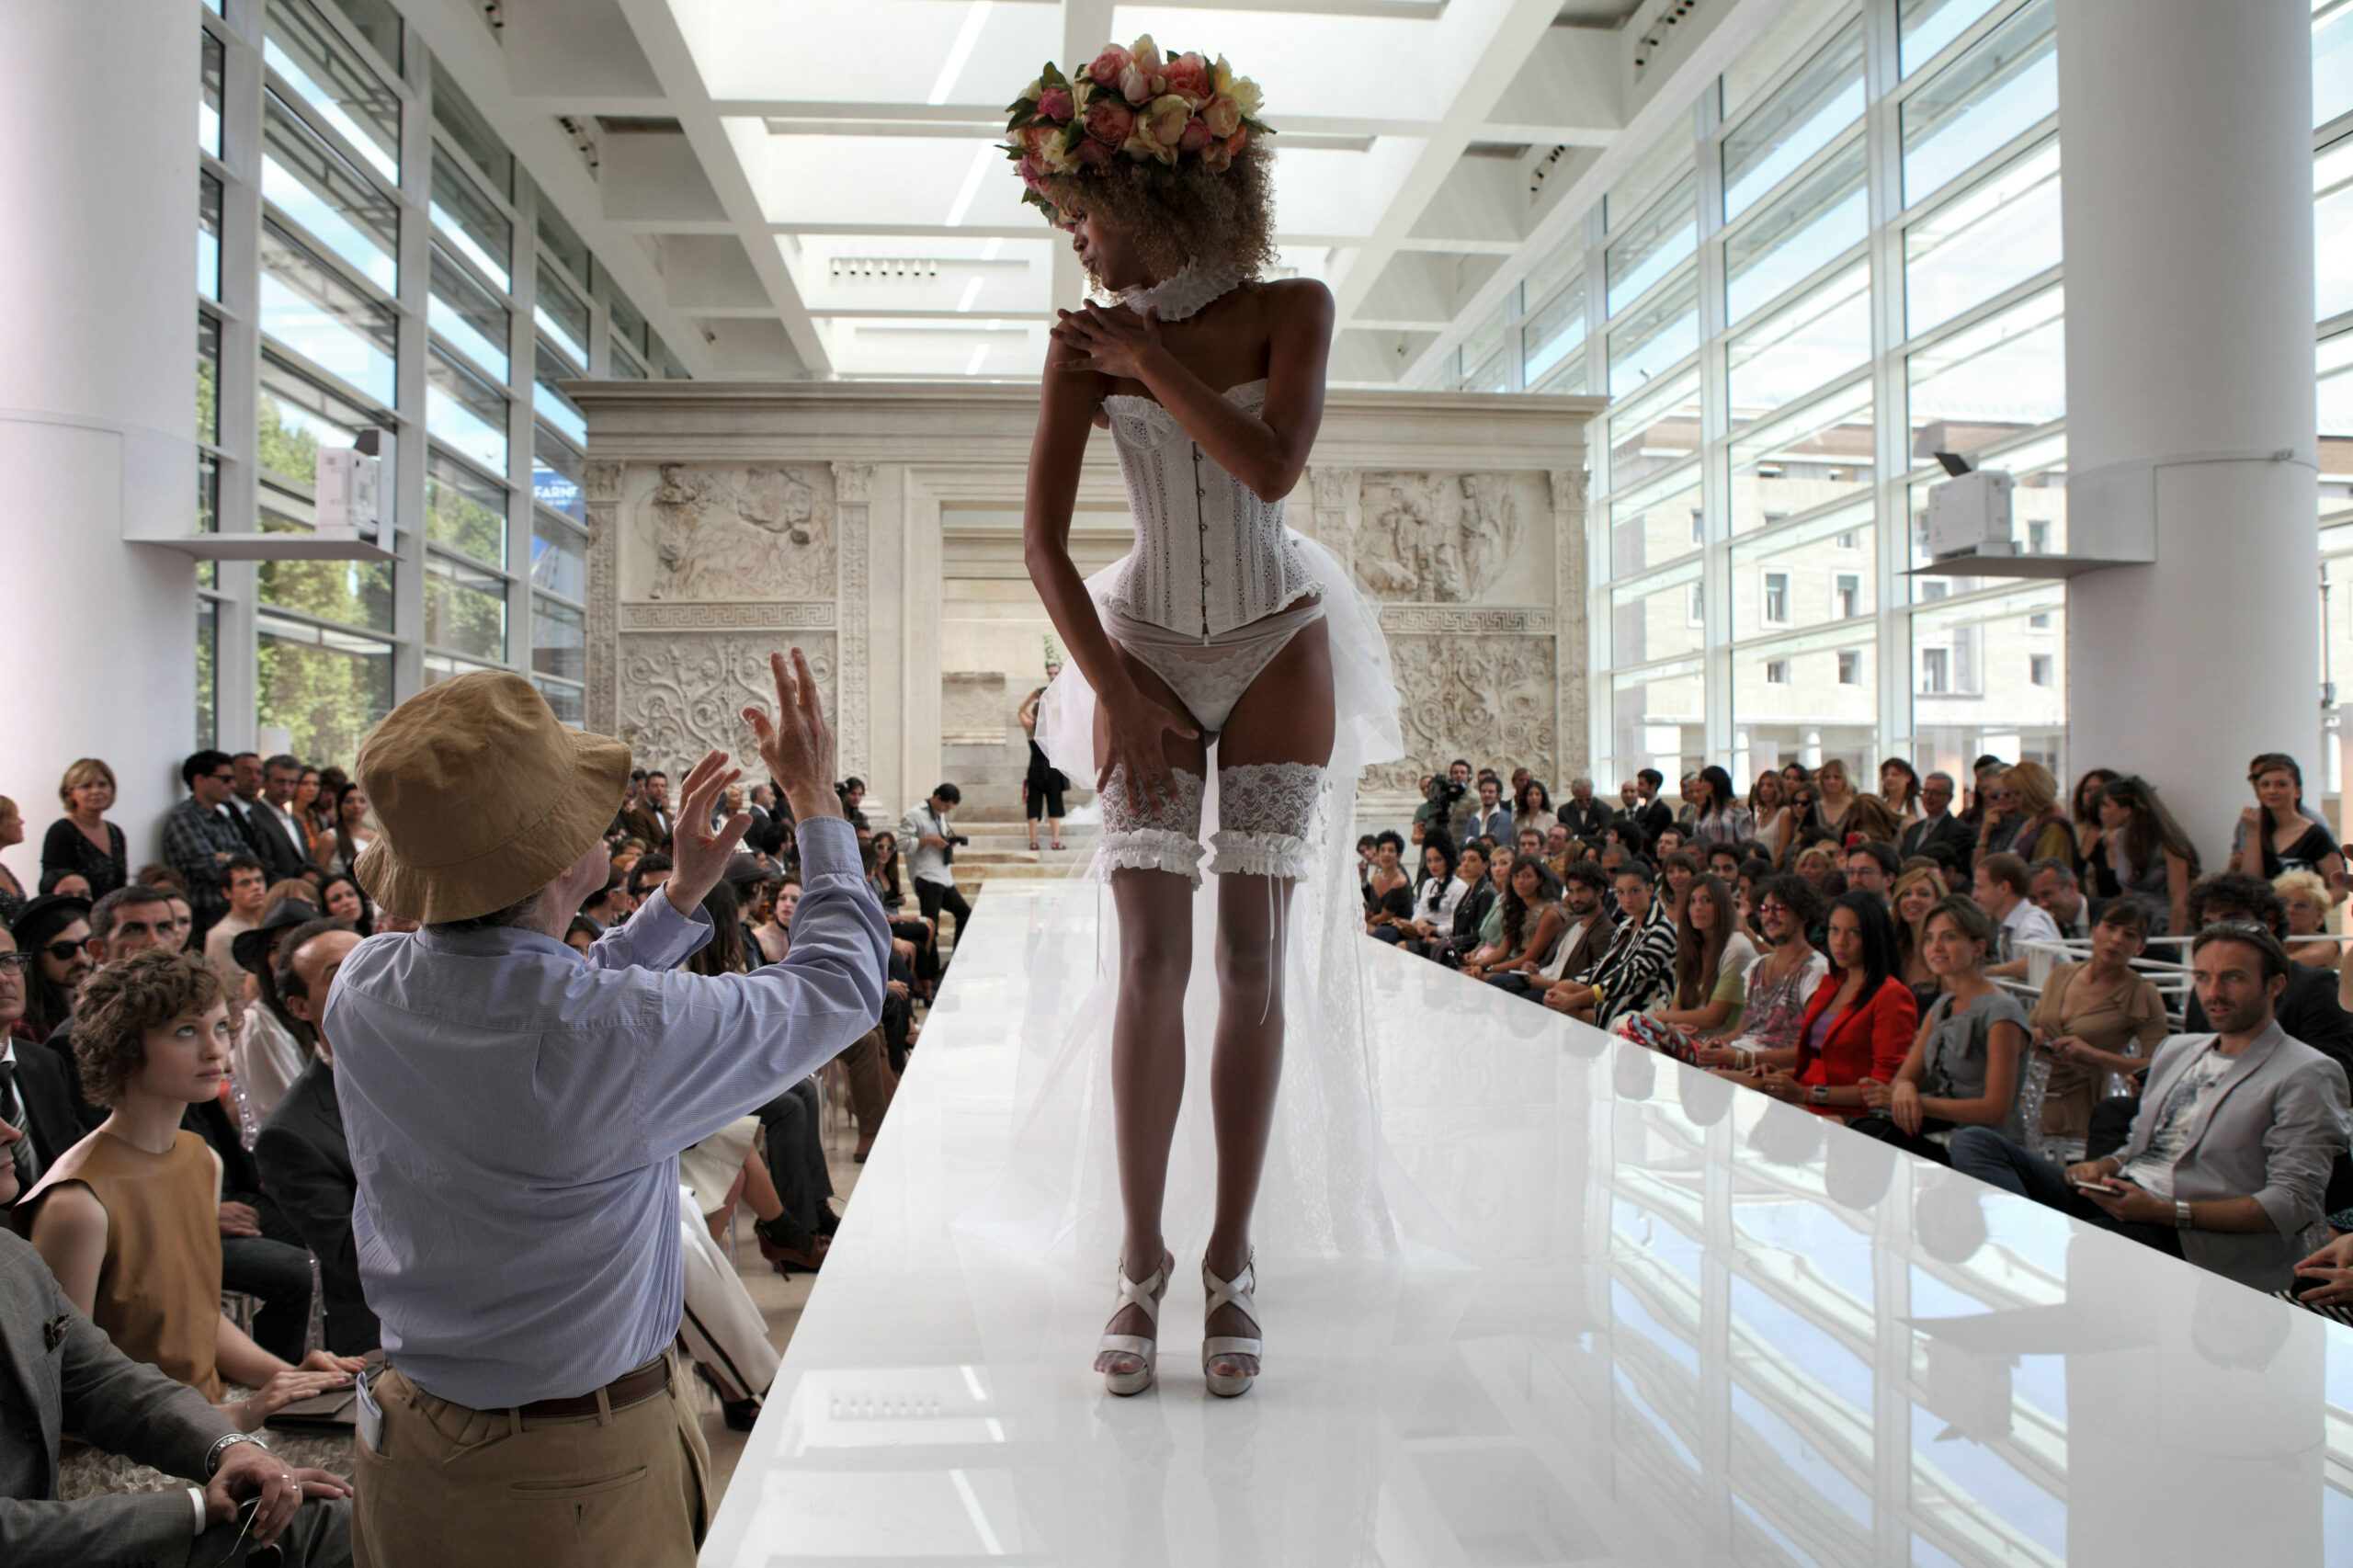 TO ROME WITH LOVE - Directed by Woody Allen - Int. Fashion Show - ©2012 - Sony Pictures